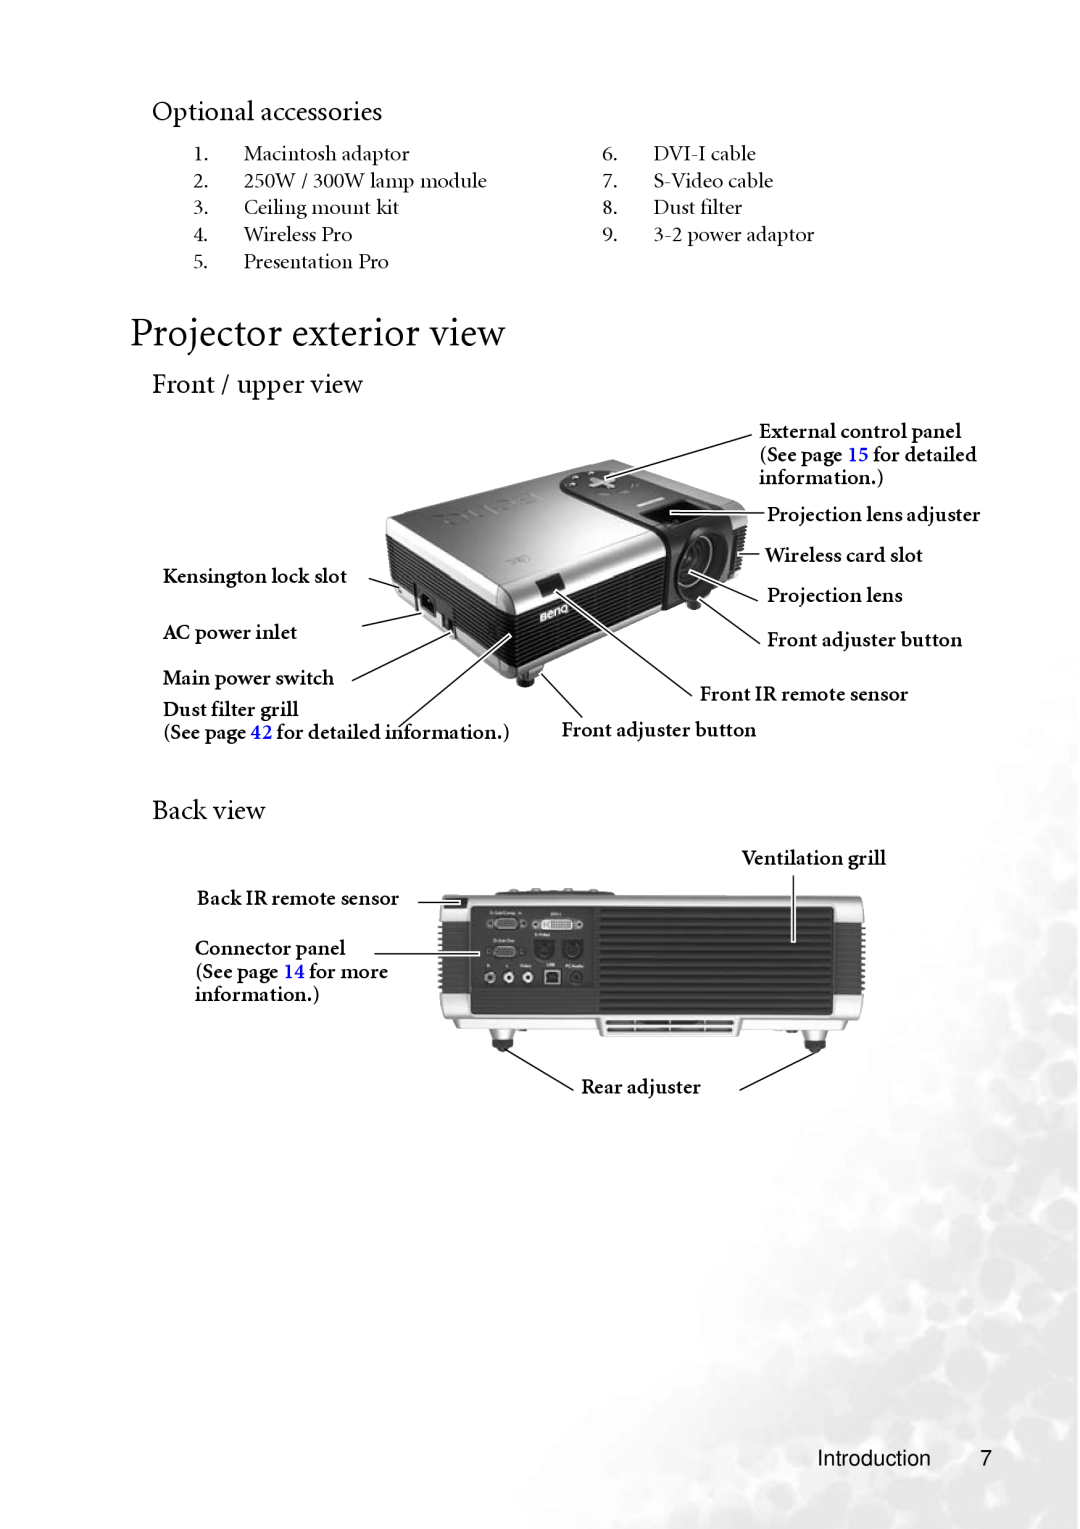 BenQ PB8260 user manual Projector exterior view, Optional accessories, Front / upper view, Back view, Dust filter grill 